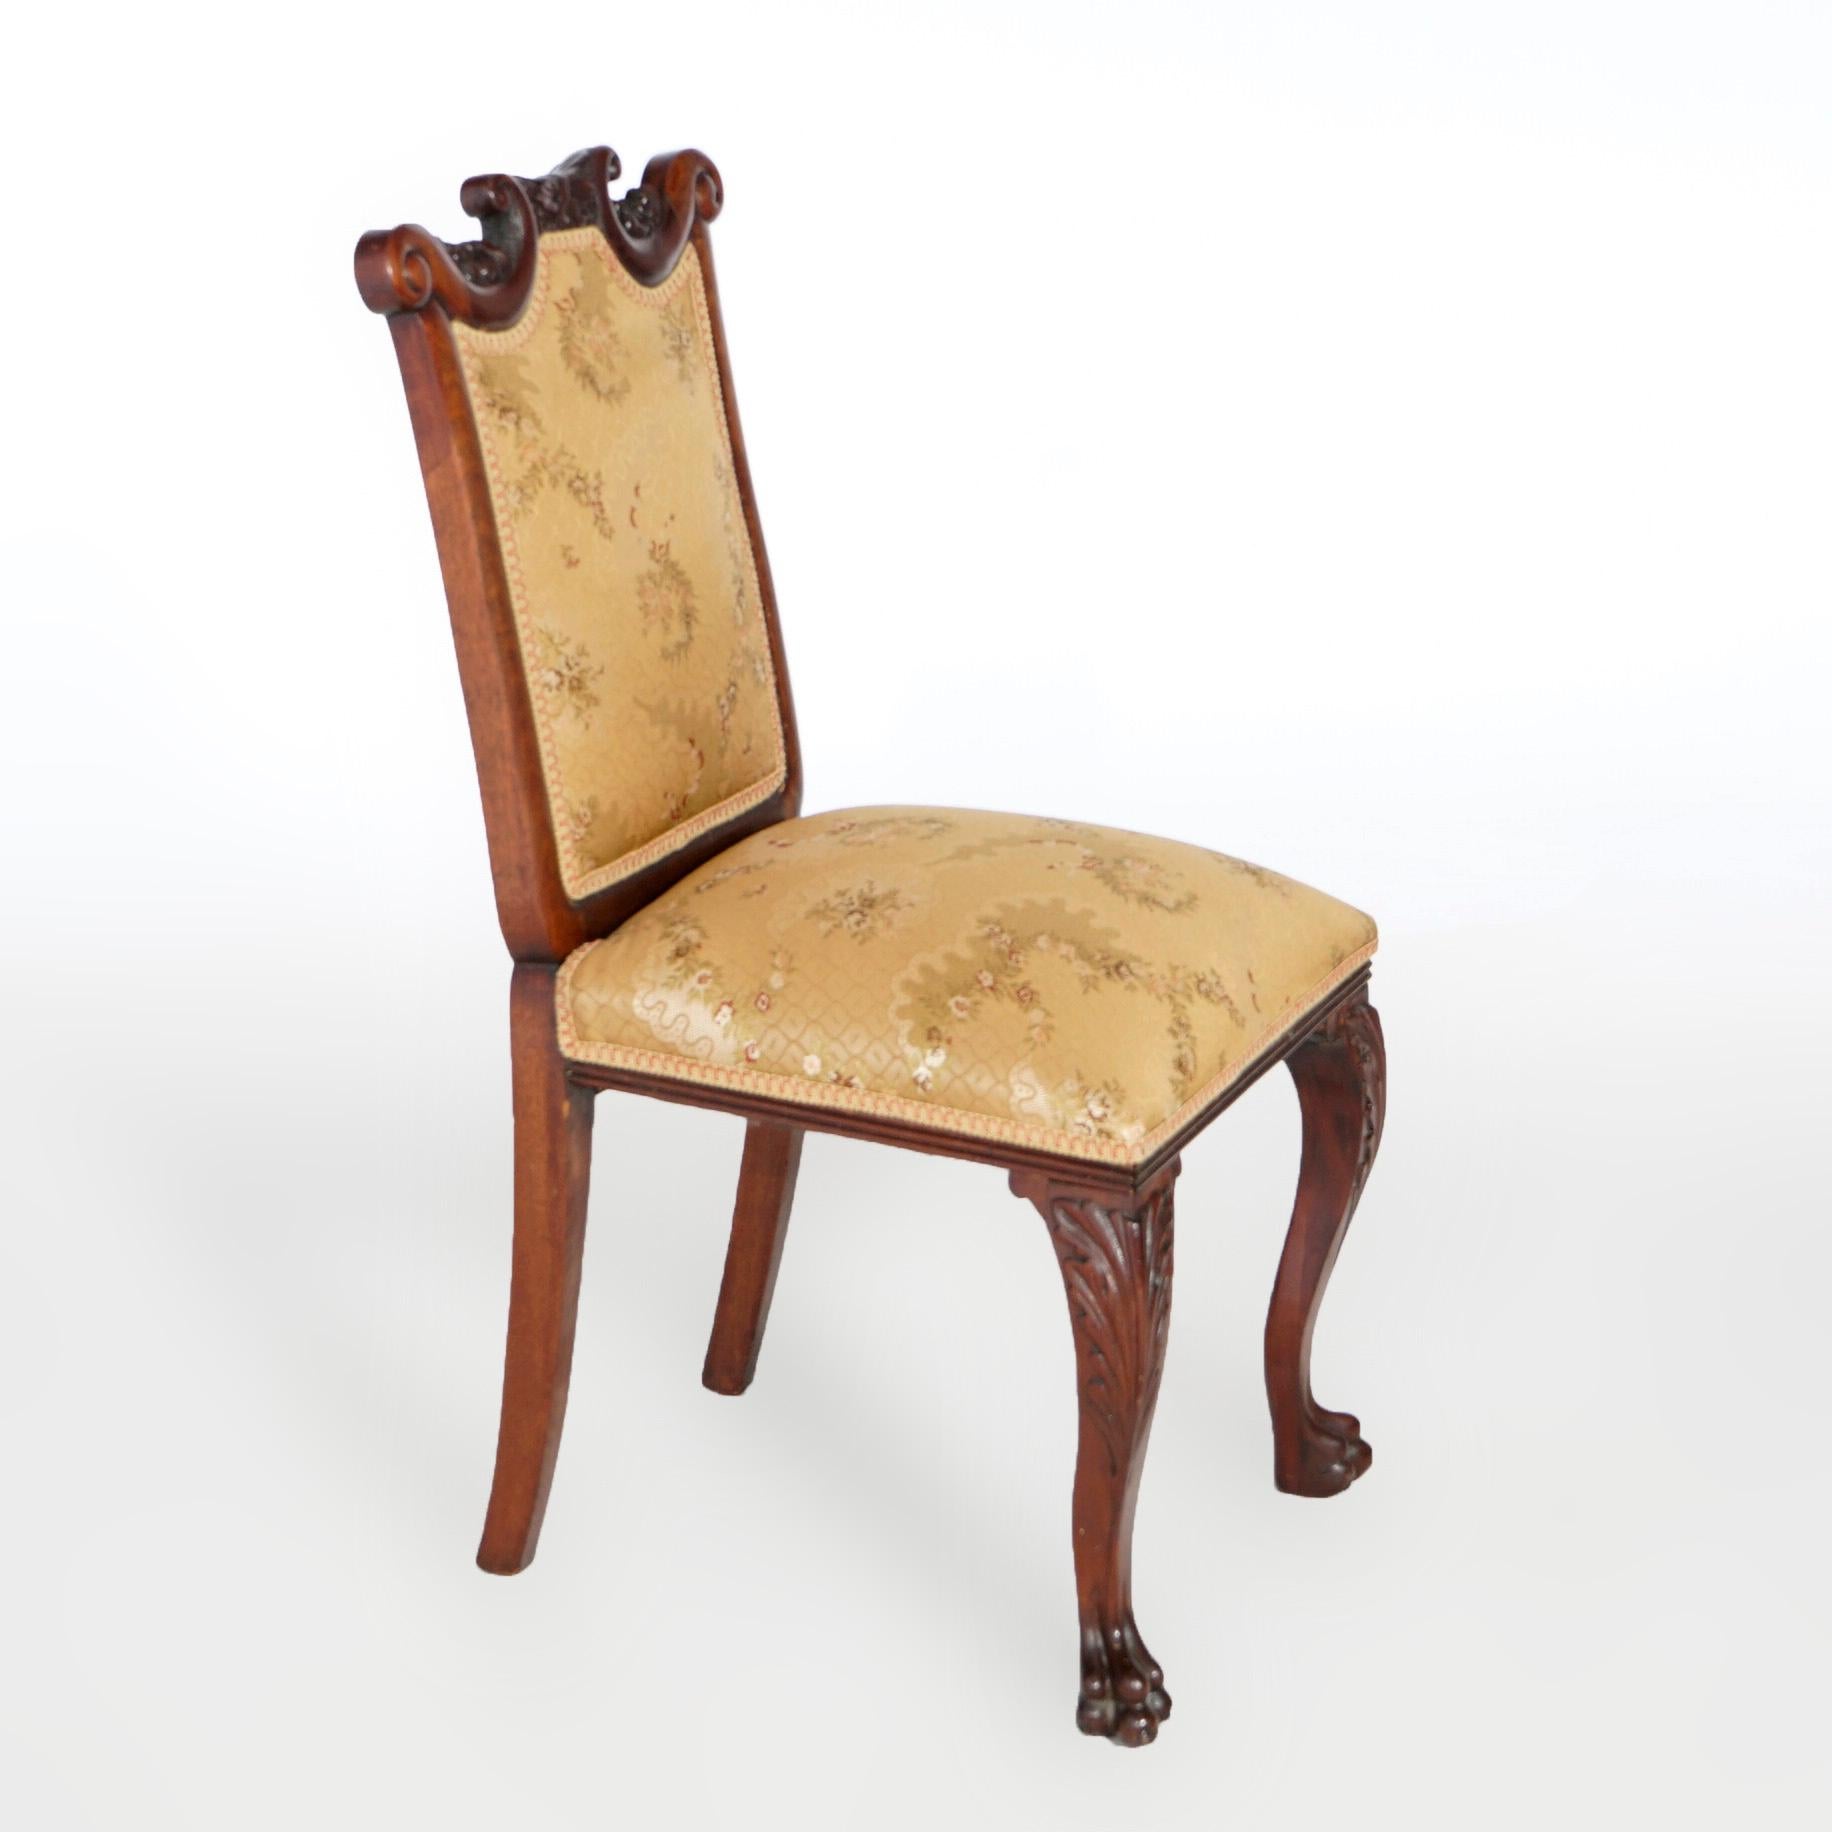 An antique Chippendale style side chair offers mahogany frame with carved scroll form crest having flanking scroll elements over upholstered back and seat, raised on cabriole legs with carved acanthus knees and terminating in paw feet, 19th